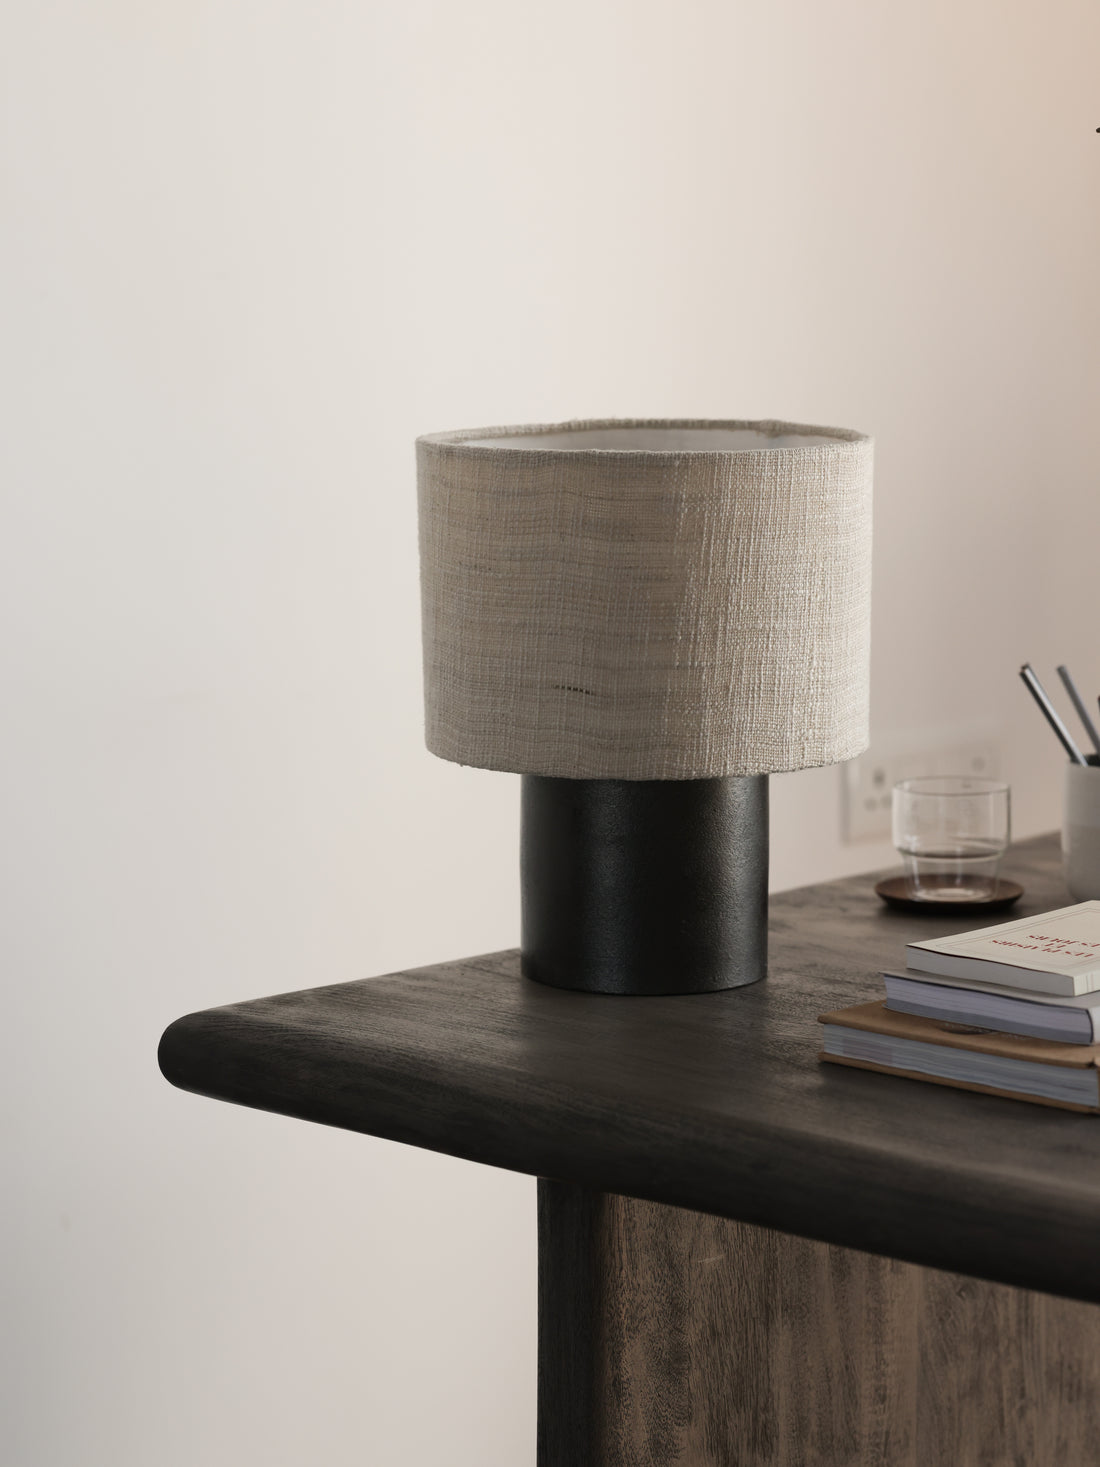 Our exclusive Noir black table lamp is great on a side table, desk or console table. Explore the entire Noir collection. 